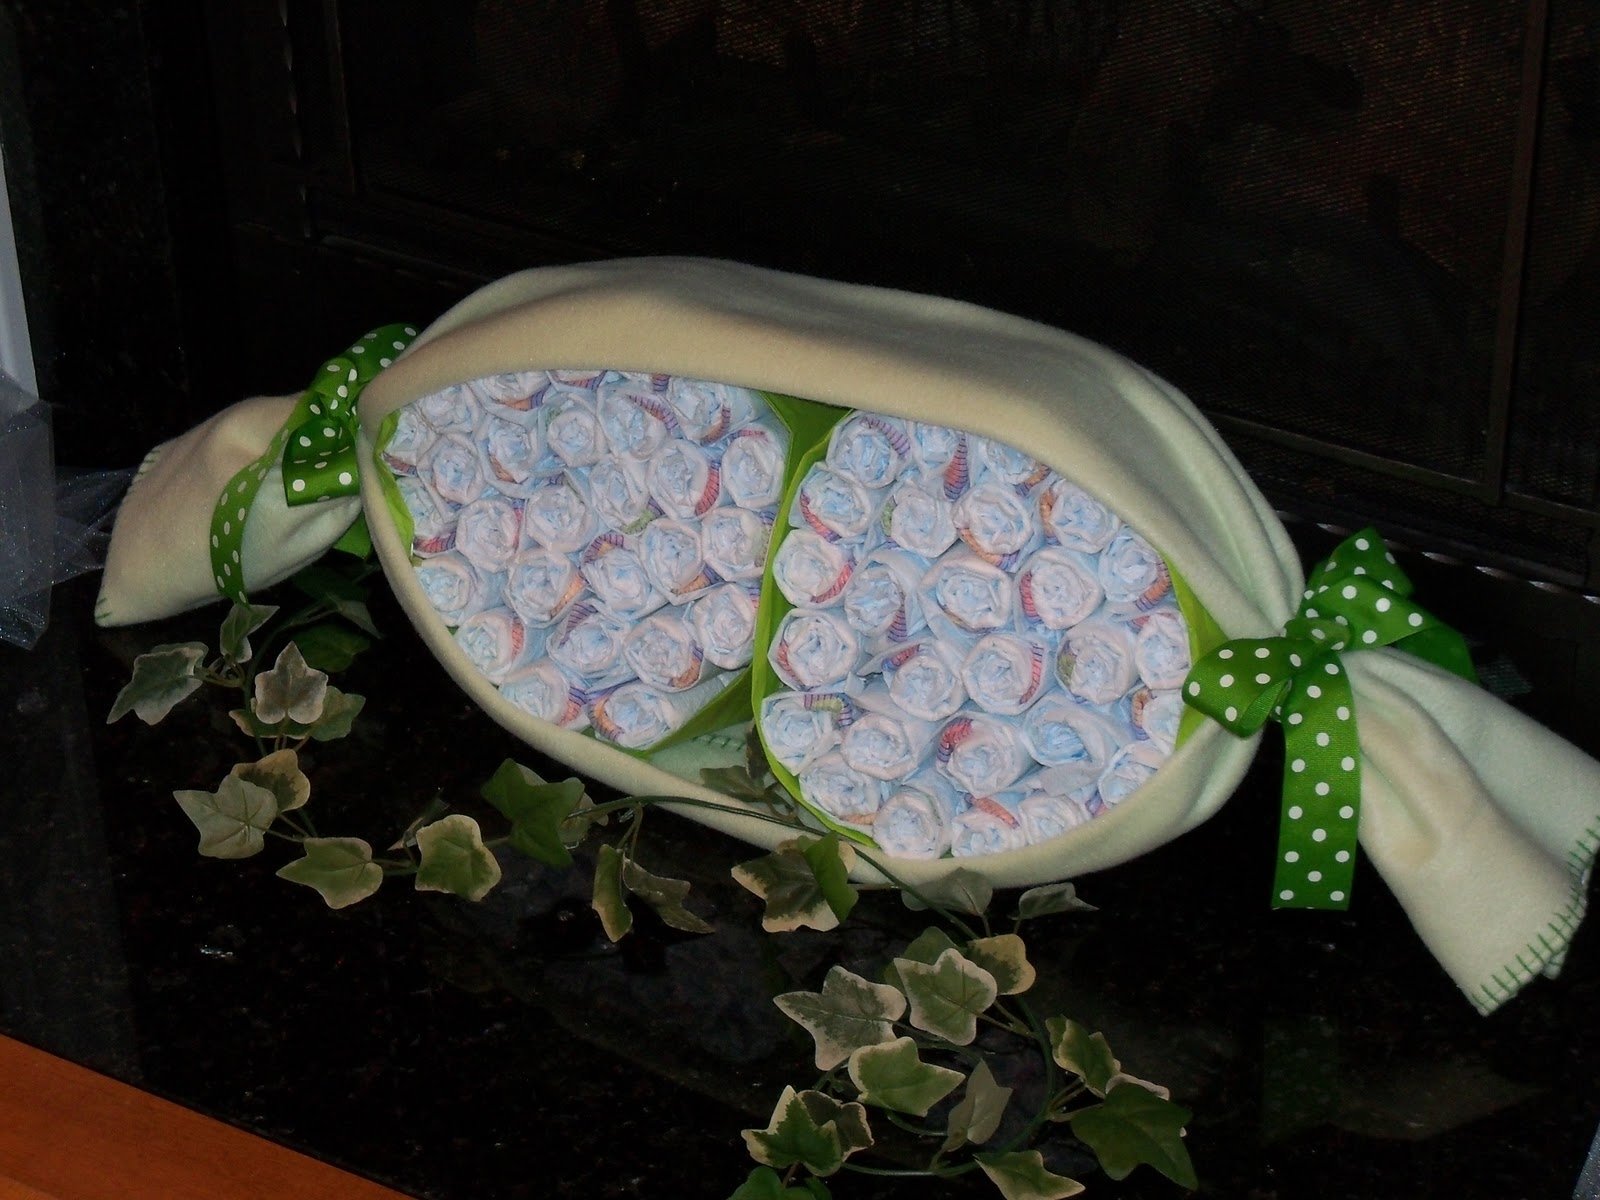 10 Most Recommended Two Peas In A Pod Baby Shower Ideas two peas in a pod diaper centerpiece awesome have to try for next 2023